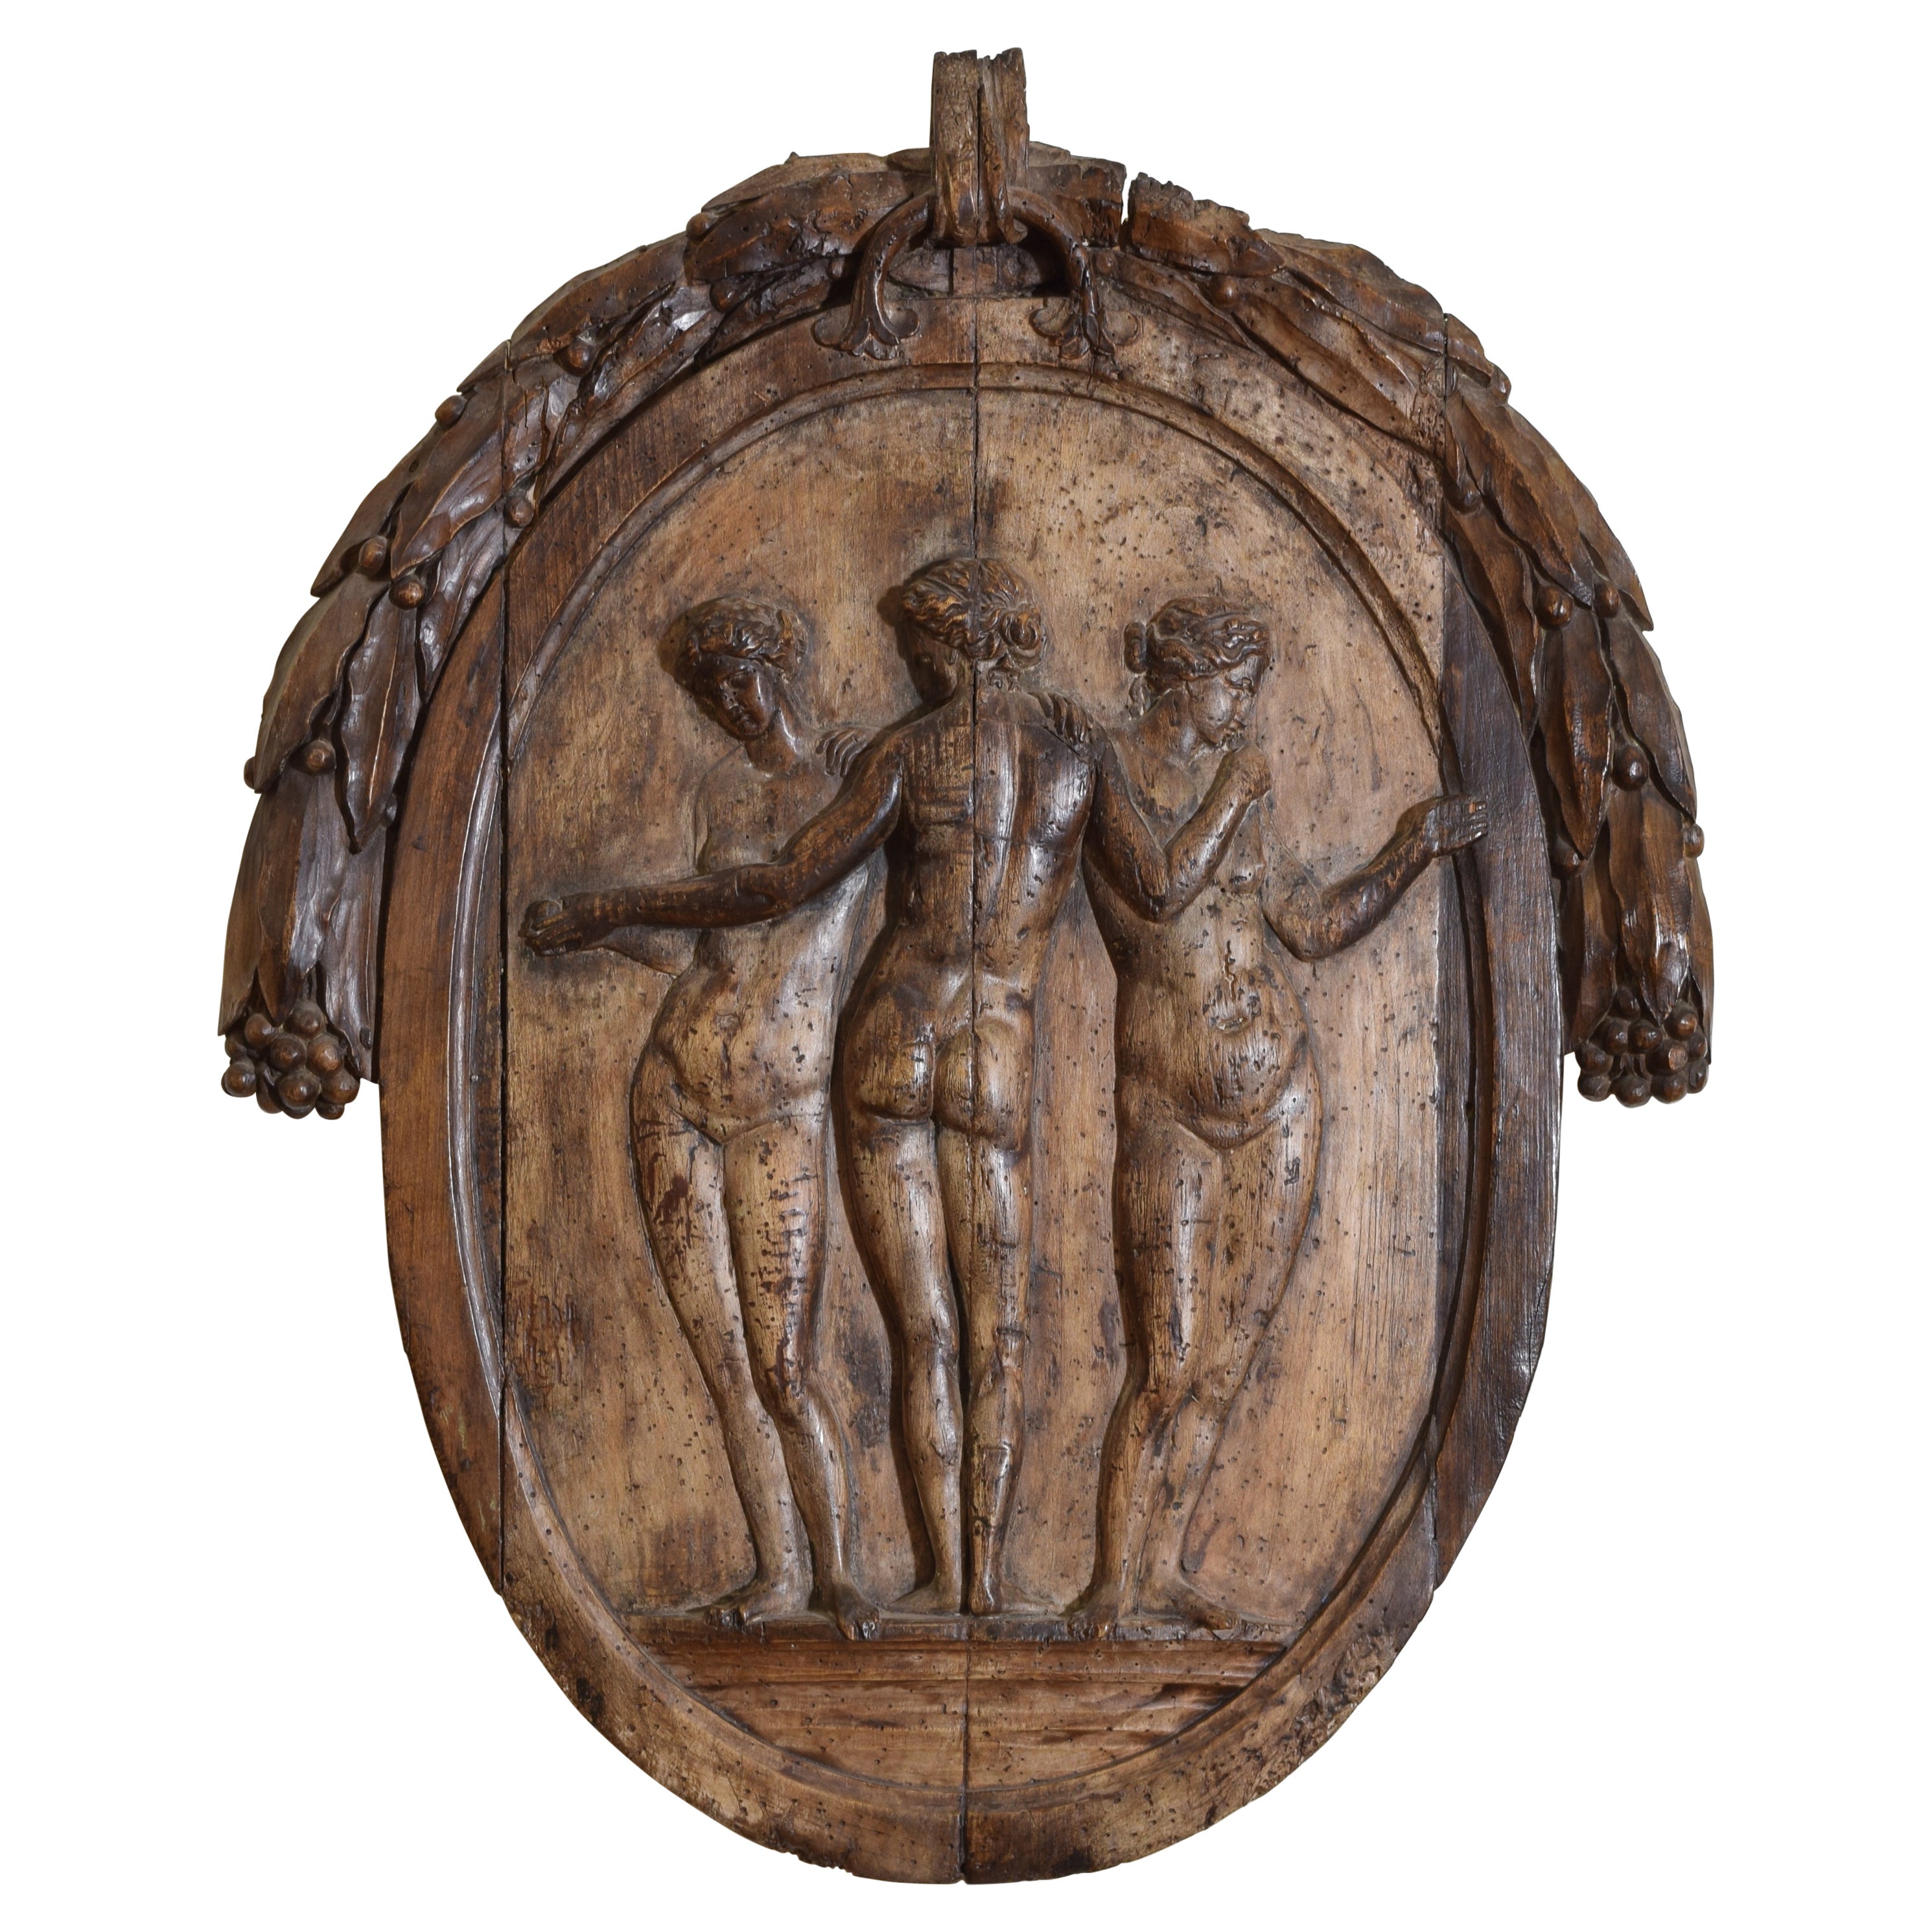 Dutch Neoclassical Carved Wooden Relief, The Three Graces, Late 18th Century For Sale